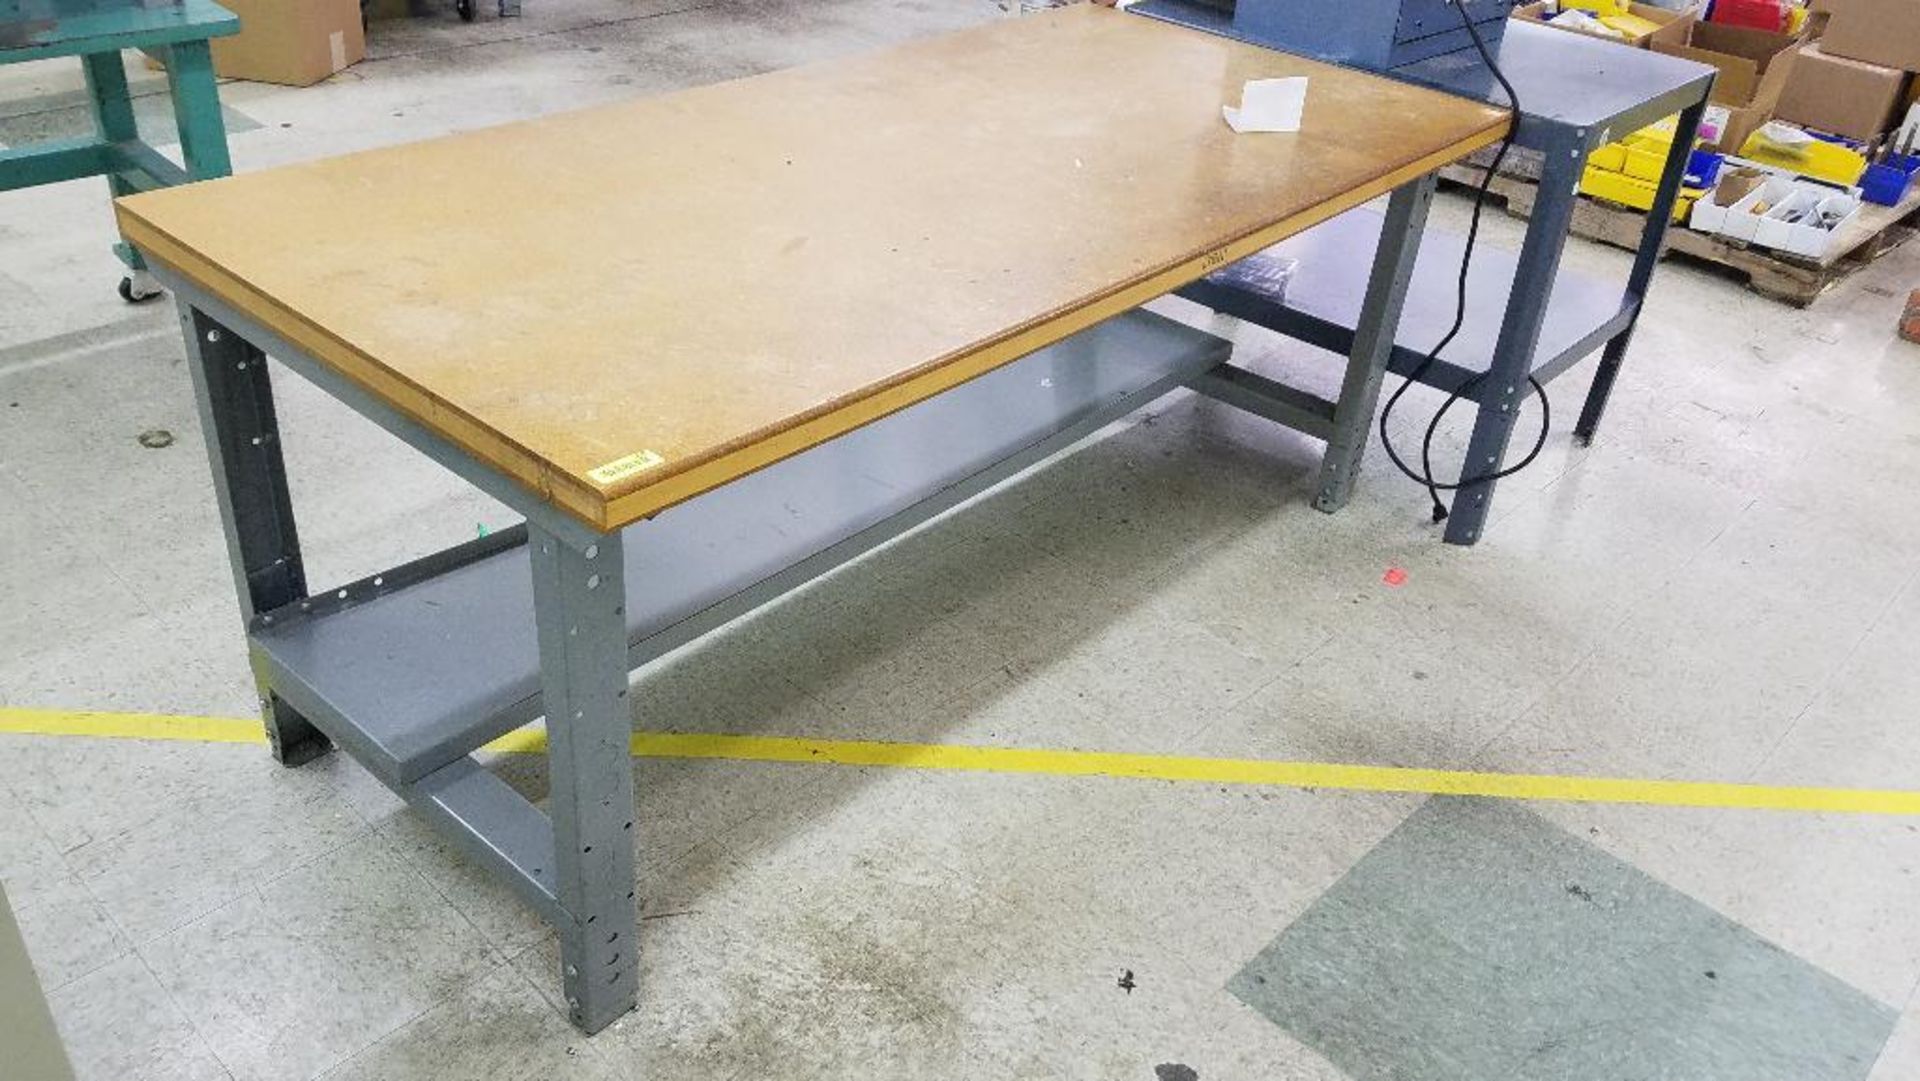 DESCRIPTION: 72 INCH X 30 INCH WORK TABLE W/ METAL BASE SIZE: 72 INCH X 30 INCH LOCATION: ASSEMBLY R